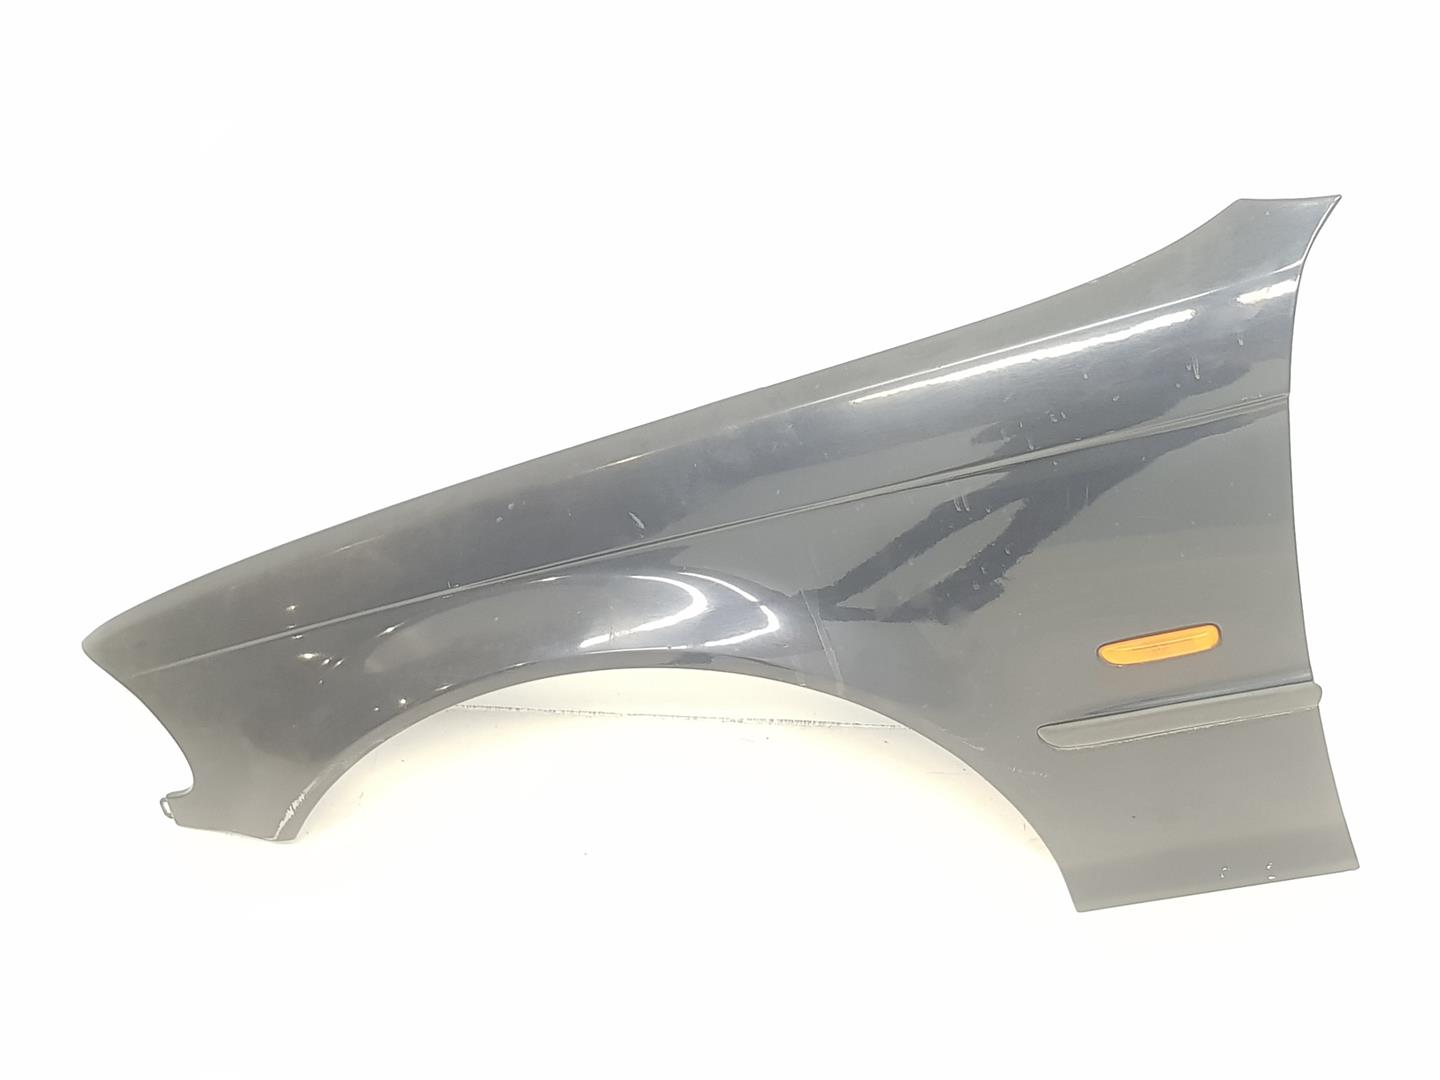 BMW 3 Series E46 (1997-2006) Front Left Fender 41358240405, 8240405, AZULOSCURO317 19833574